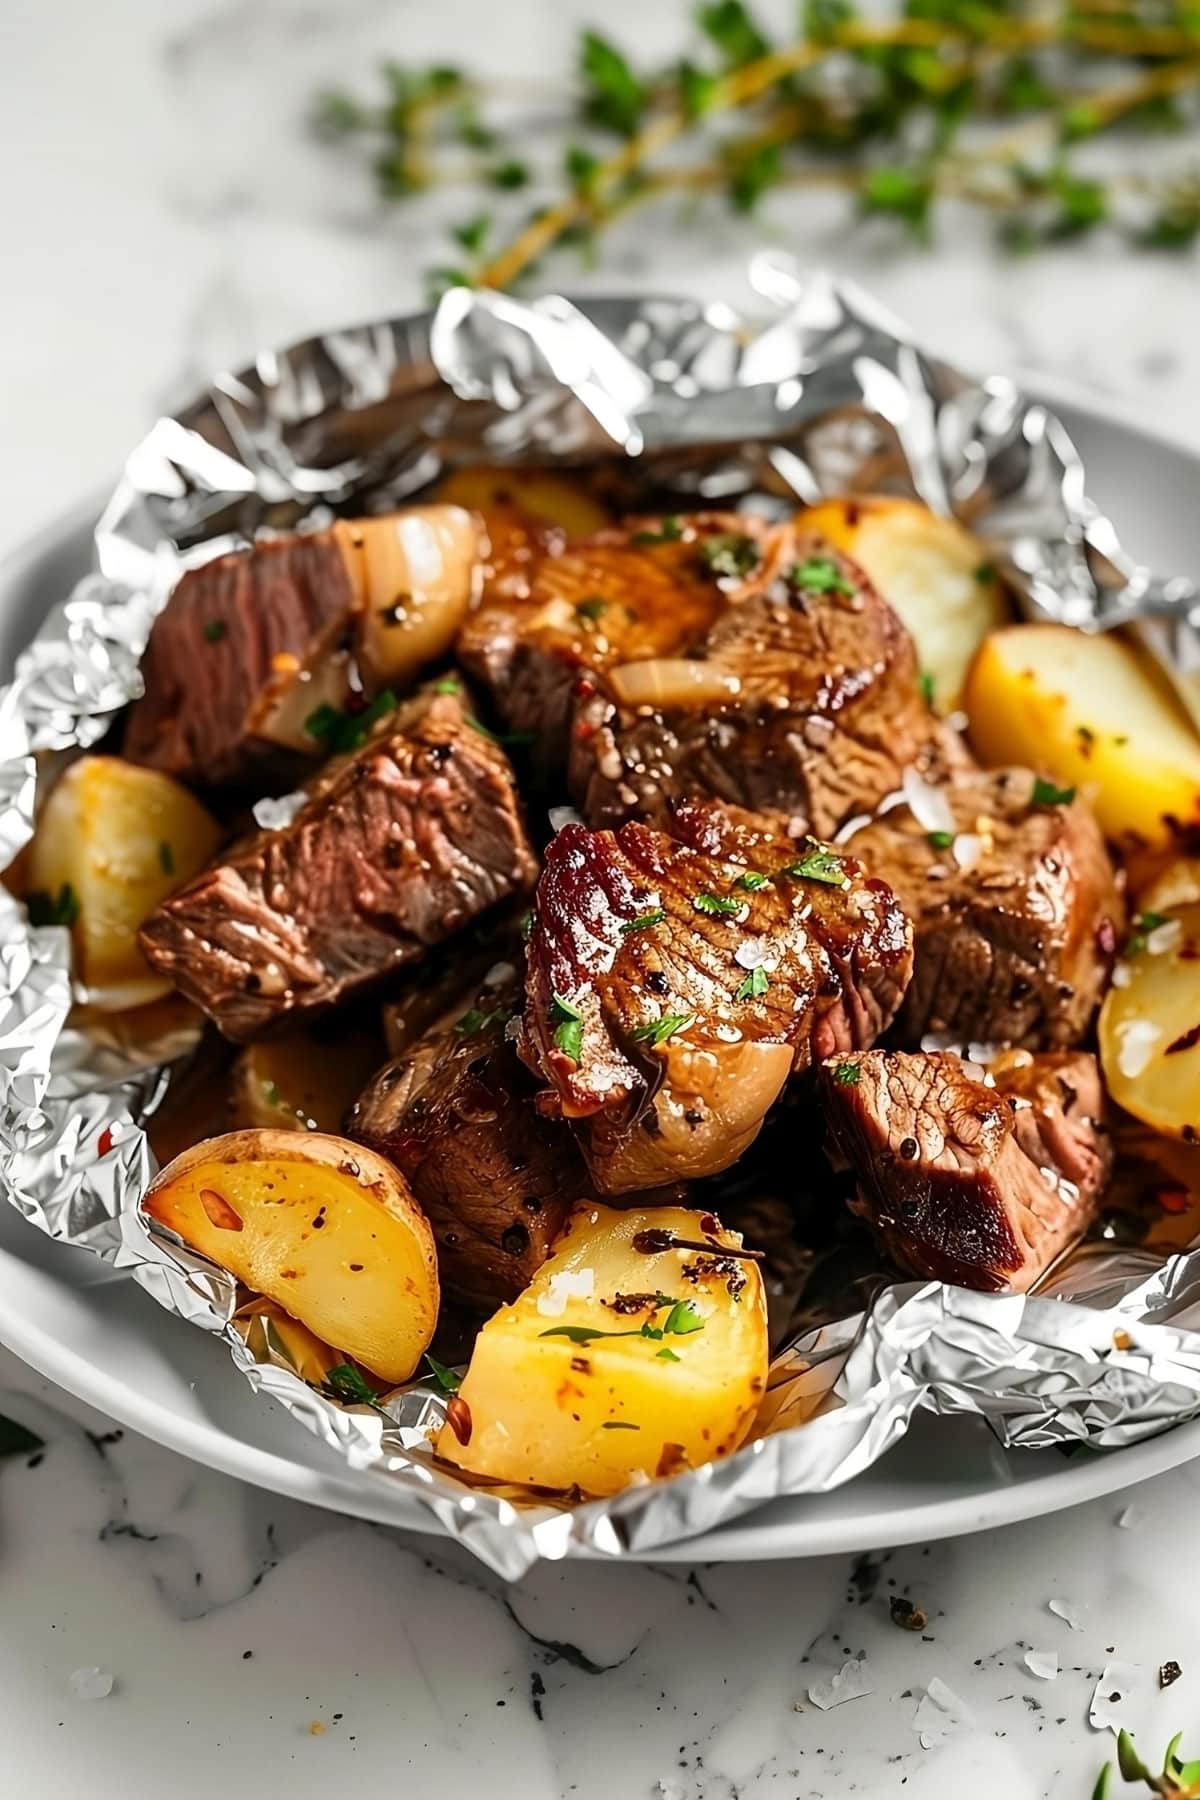 Grilled steak and baby potatoes inside an aluminum foil served on a white plate.